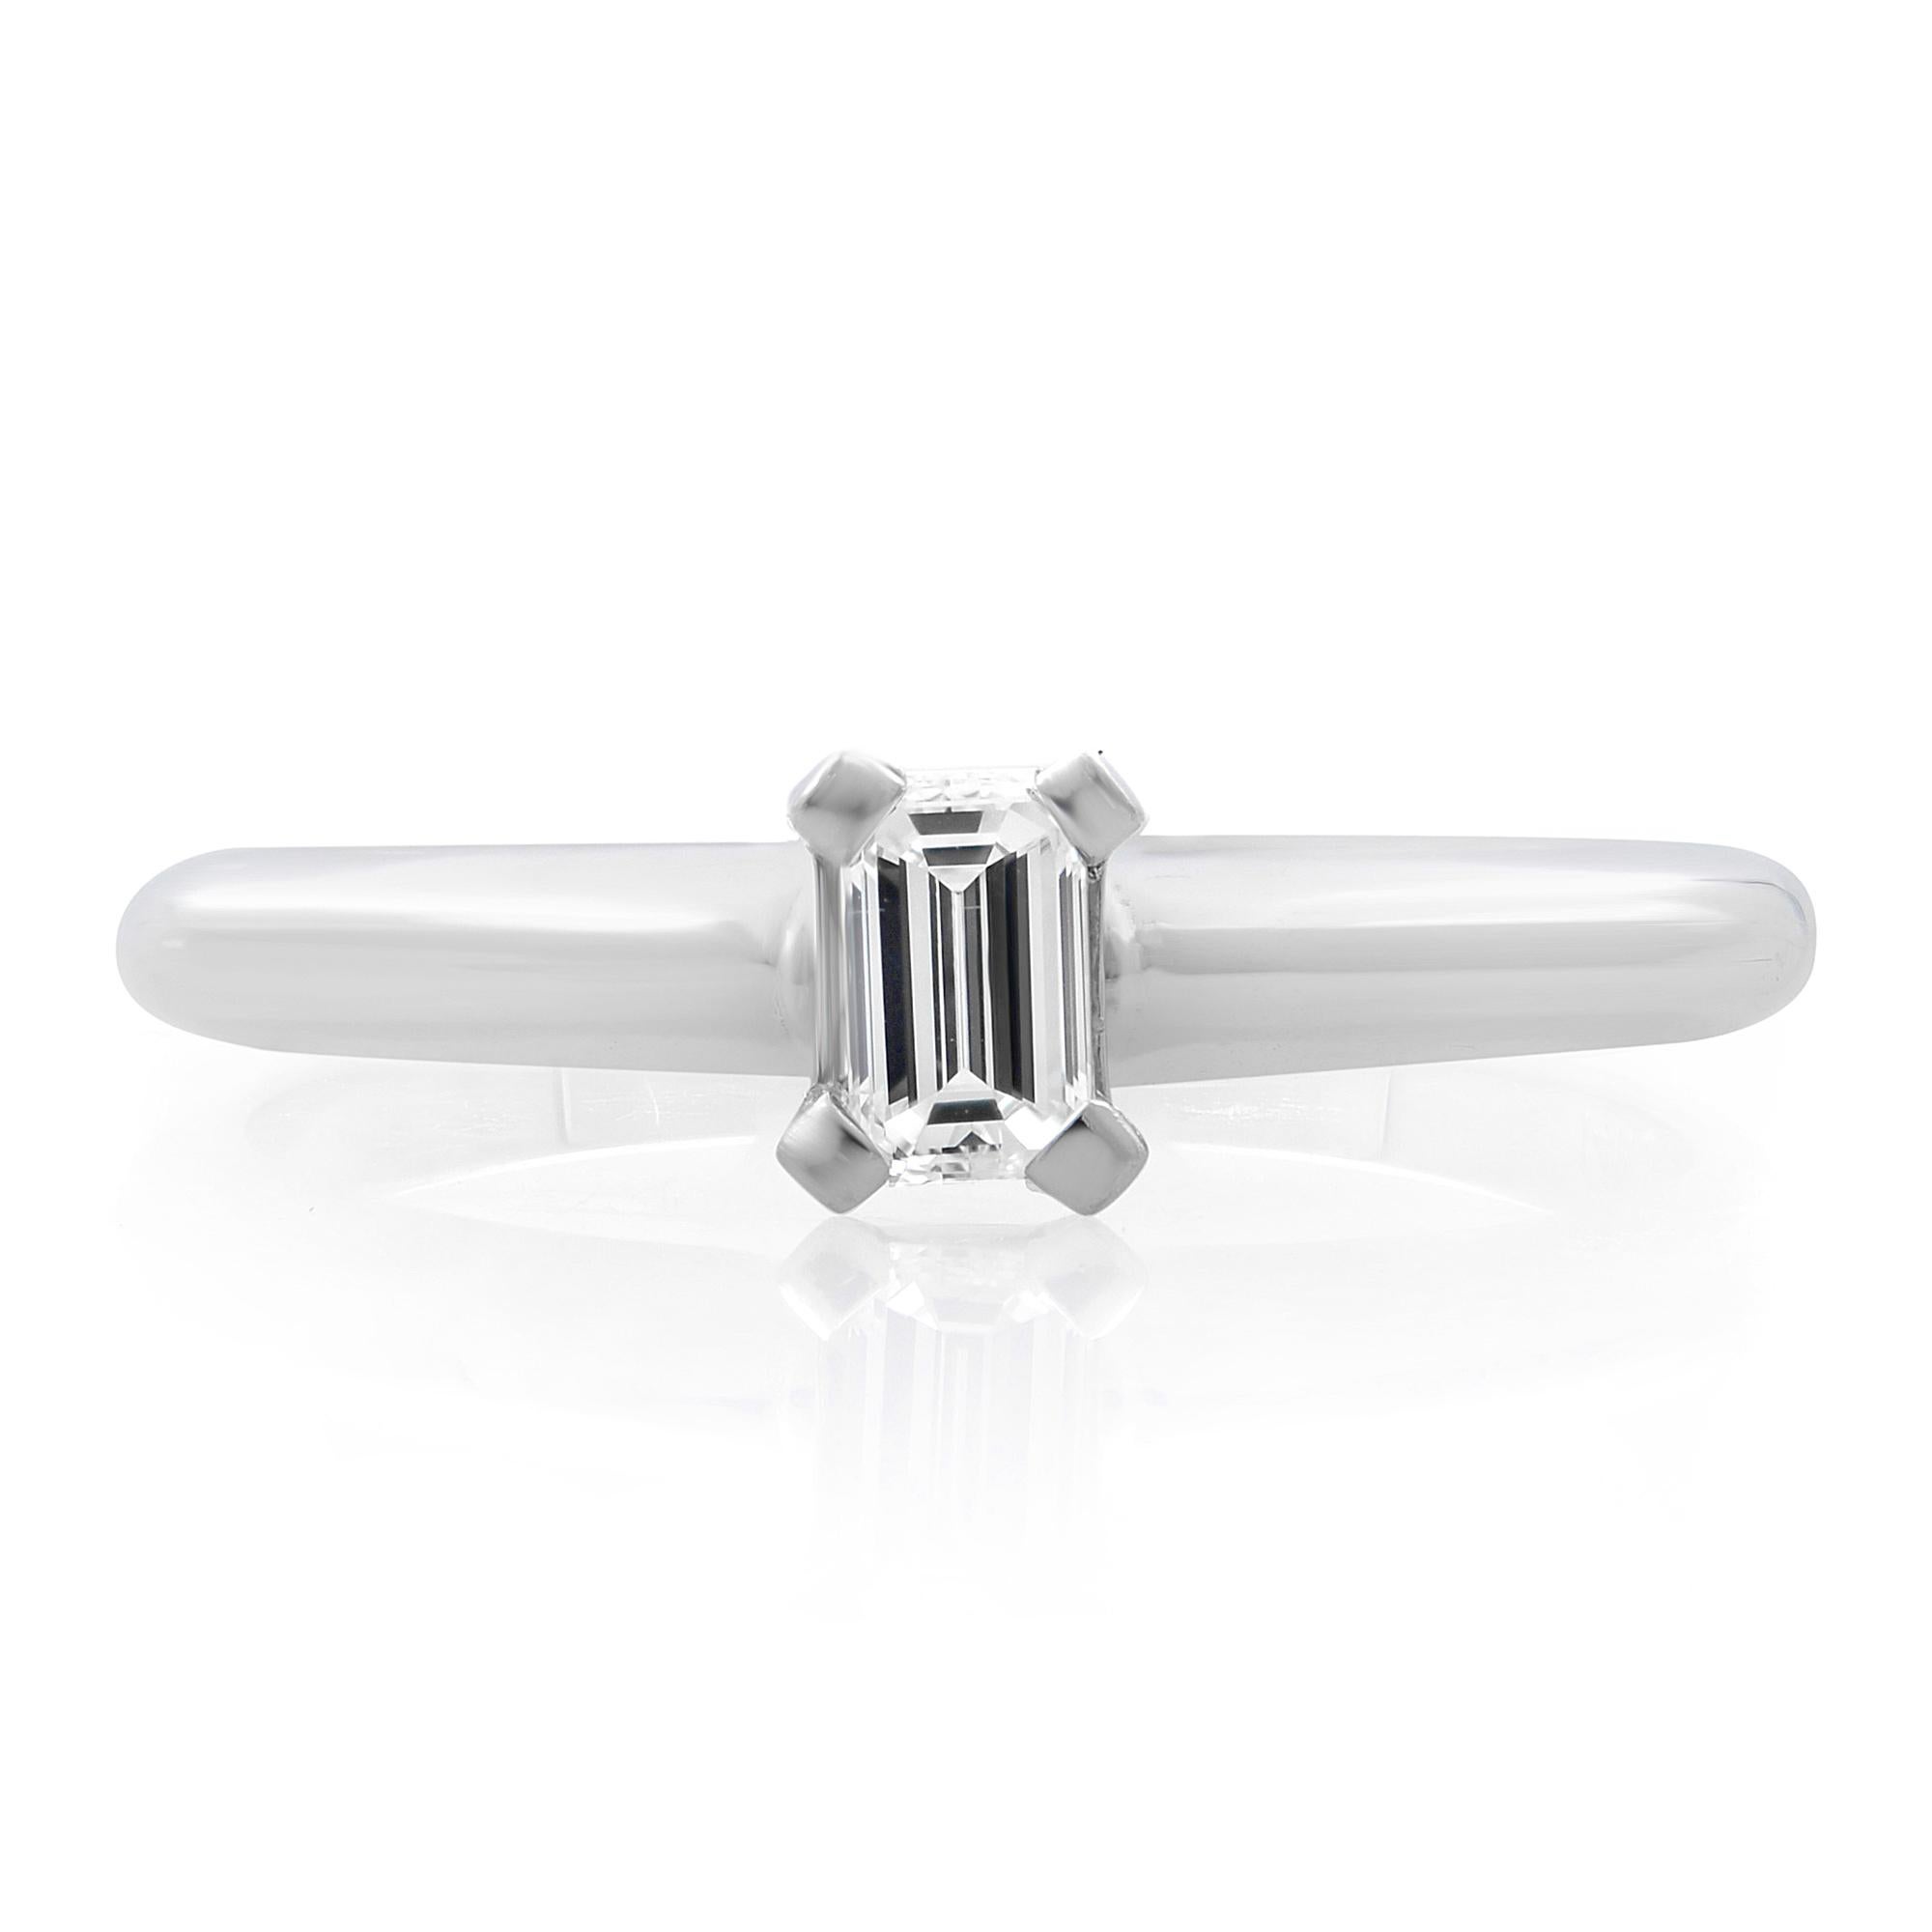 A delicate solitaire emerald cut diamond ring. Crafted in 14k white gold. The center stone weights, 0.20cttw. Diamond color G and VS-SI clarity. Ring size 6. Comes with a presentable gift box. 
